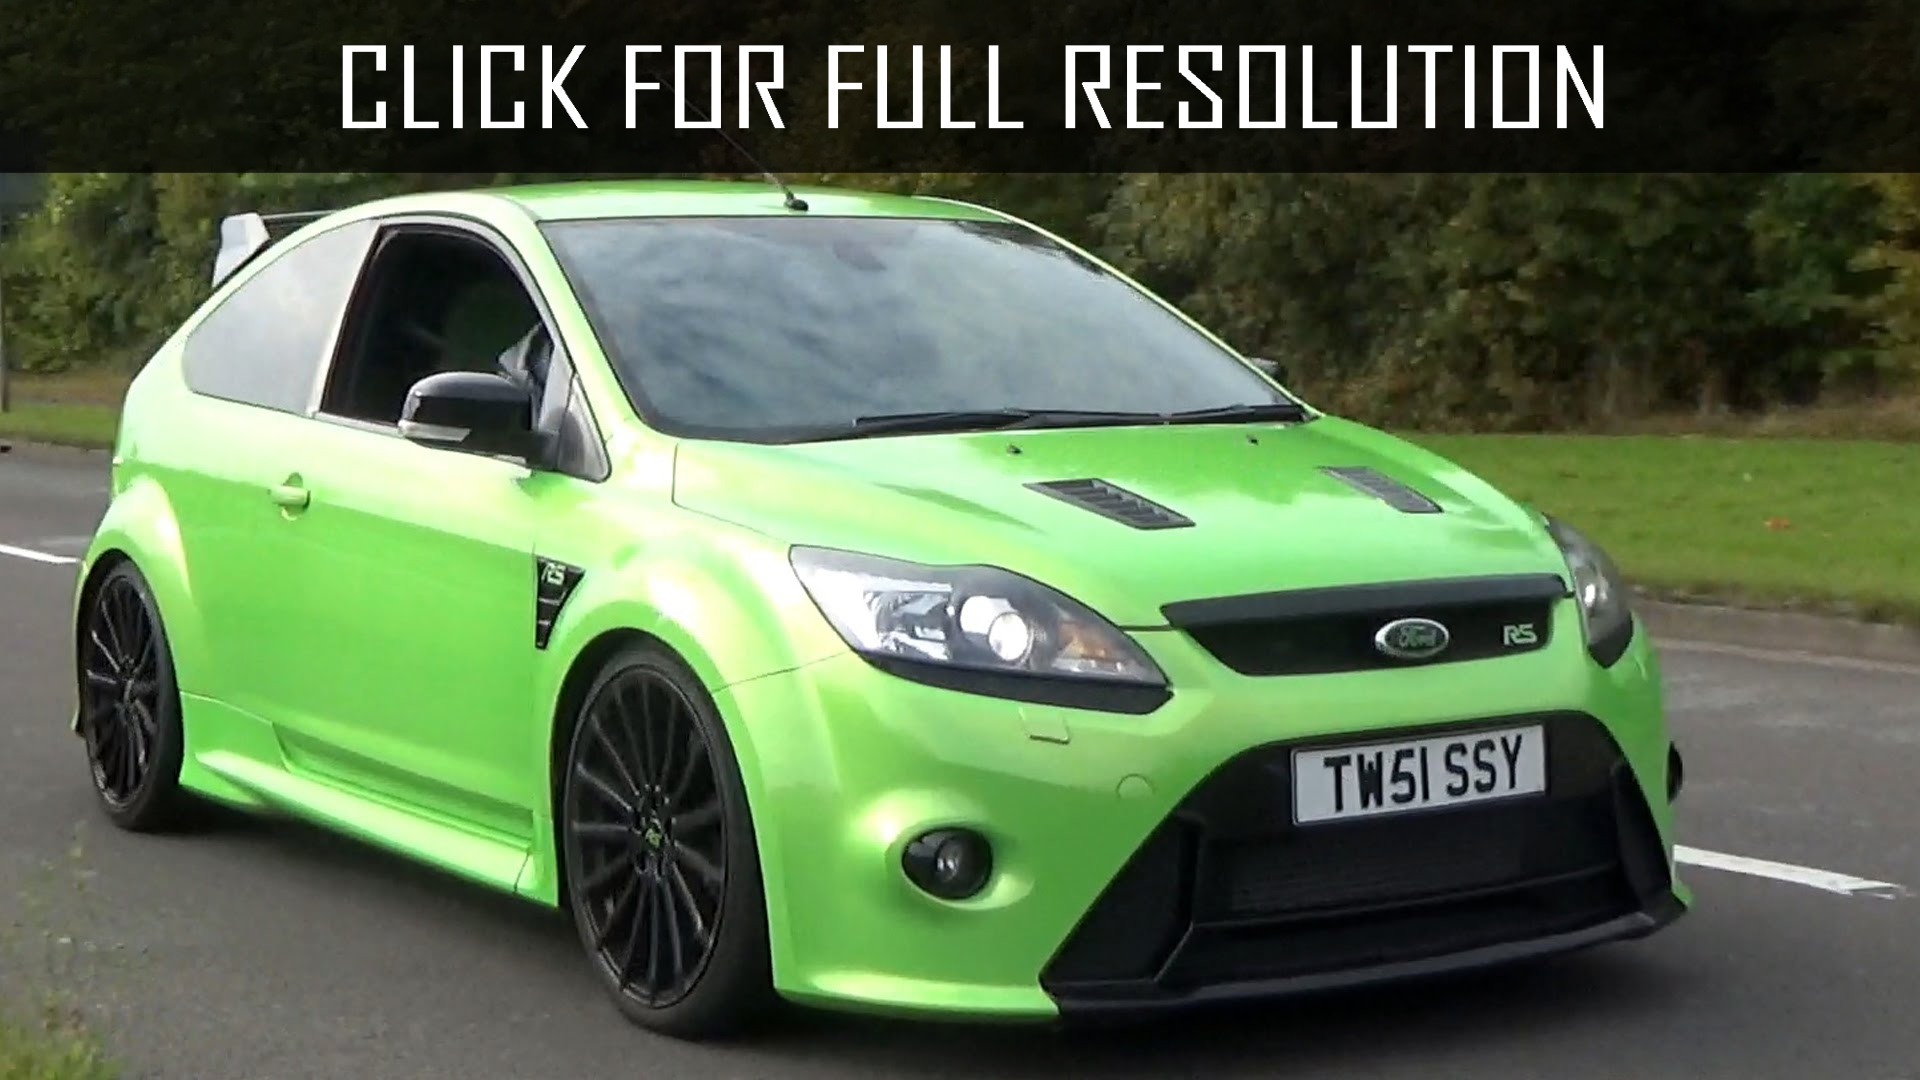 Ford Focus Rs Mk2 amazing photo gallery, some